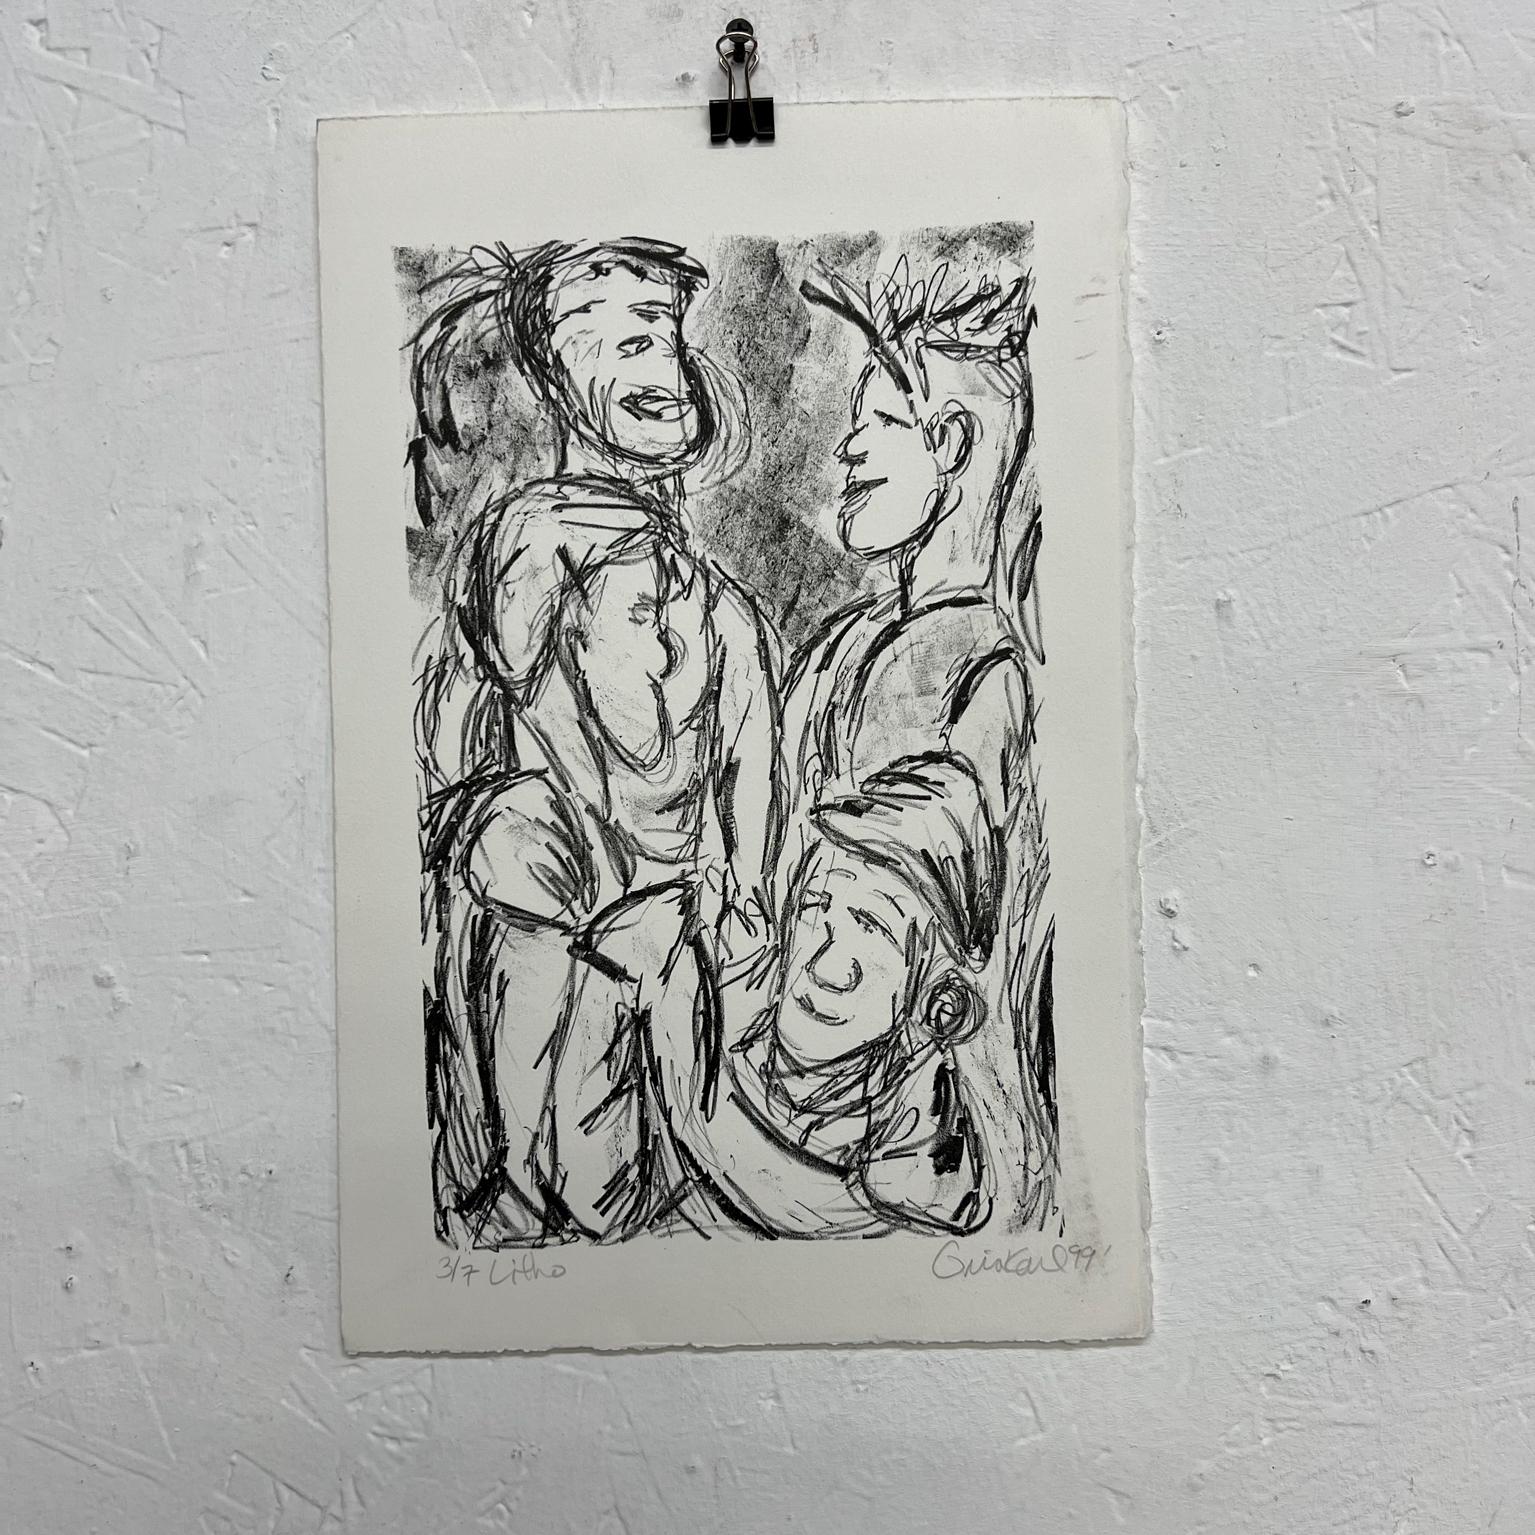 1999 Art by Gina Kail Lithograph 3/7 Abstract male figures
Measures: 9.5 x 14.5 art 7.5 x 11.75
Preowned original vintage unrestored art
See images please.
   